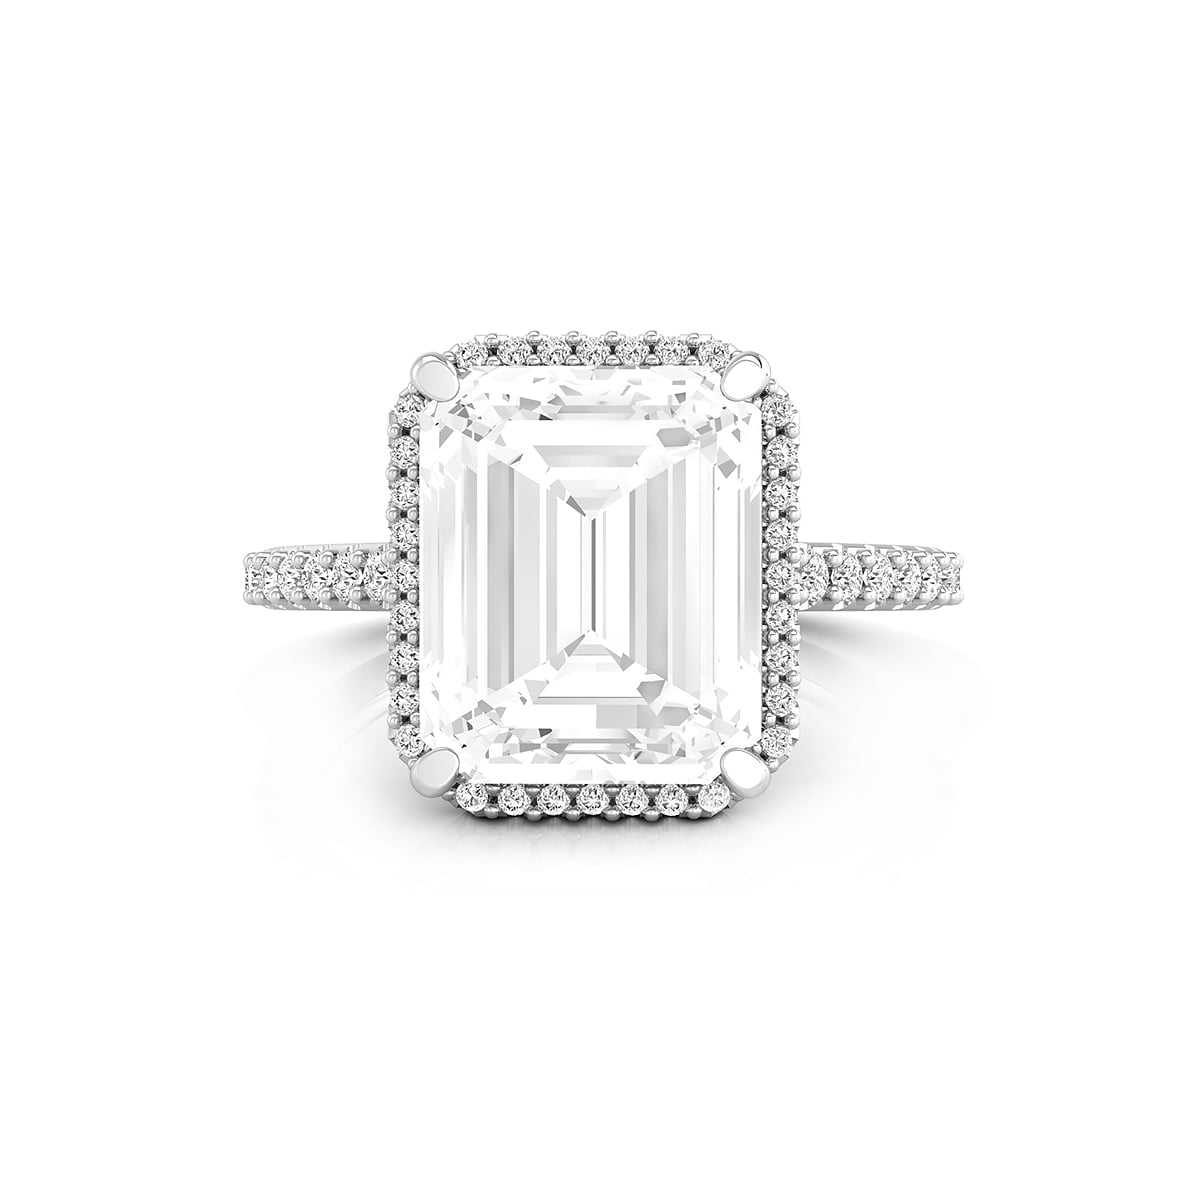 Solitaire With Accent Emerald Cut Moissanite Halo Set Engagement Ring (6 1/2 TCW)